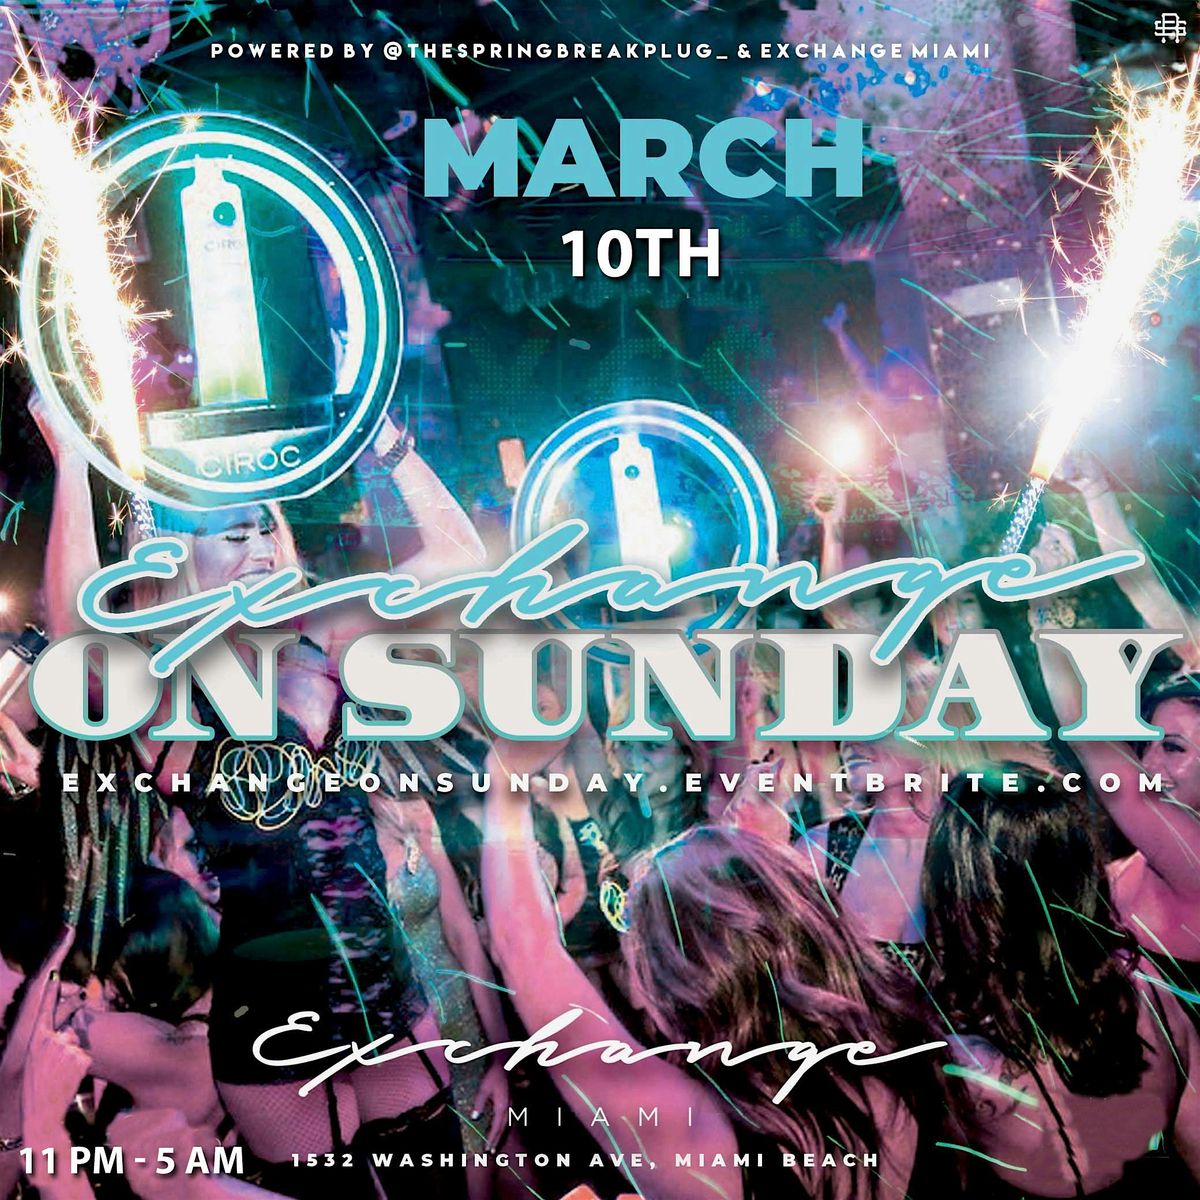 EXCHANGE ON SUNDAY - The Hottest Sunday Party on South Beach